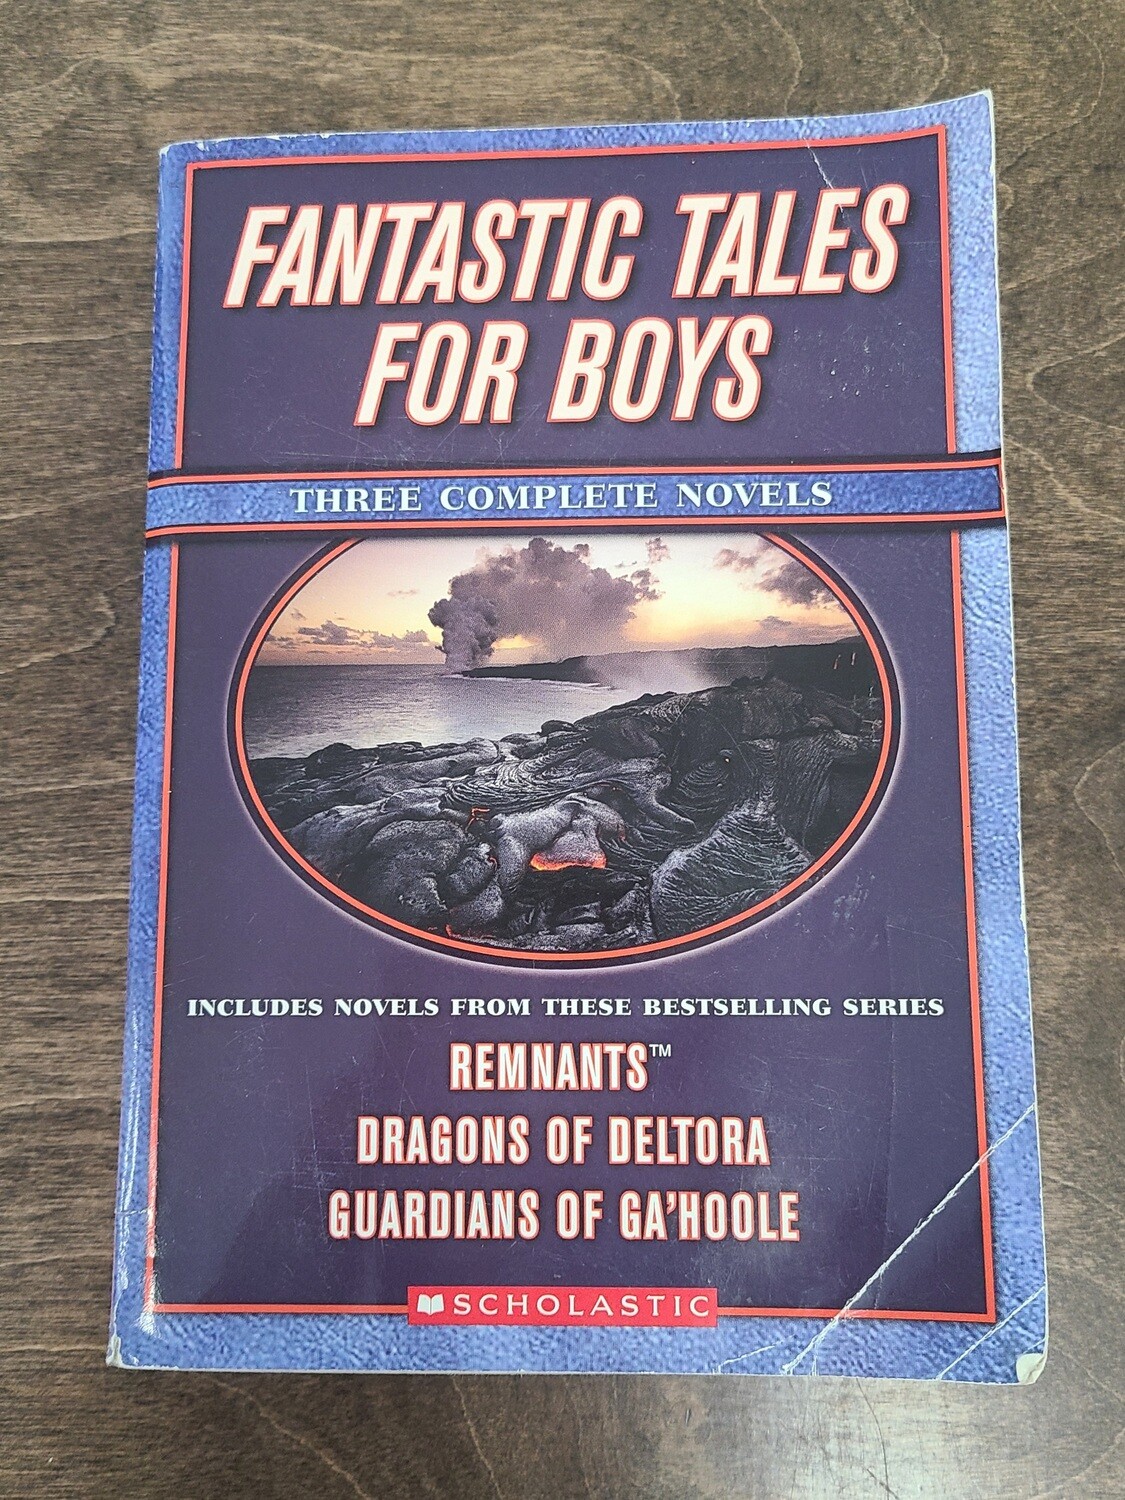 Fantastic Tales for Boys: Remnants, Dragons of Deltora, and Guardians of Ga'Hoole by K. A. Applegate, Emily Rodda, and Kathryn Lasky